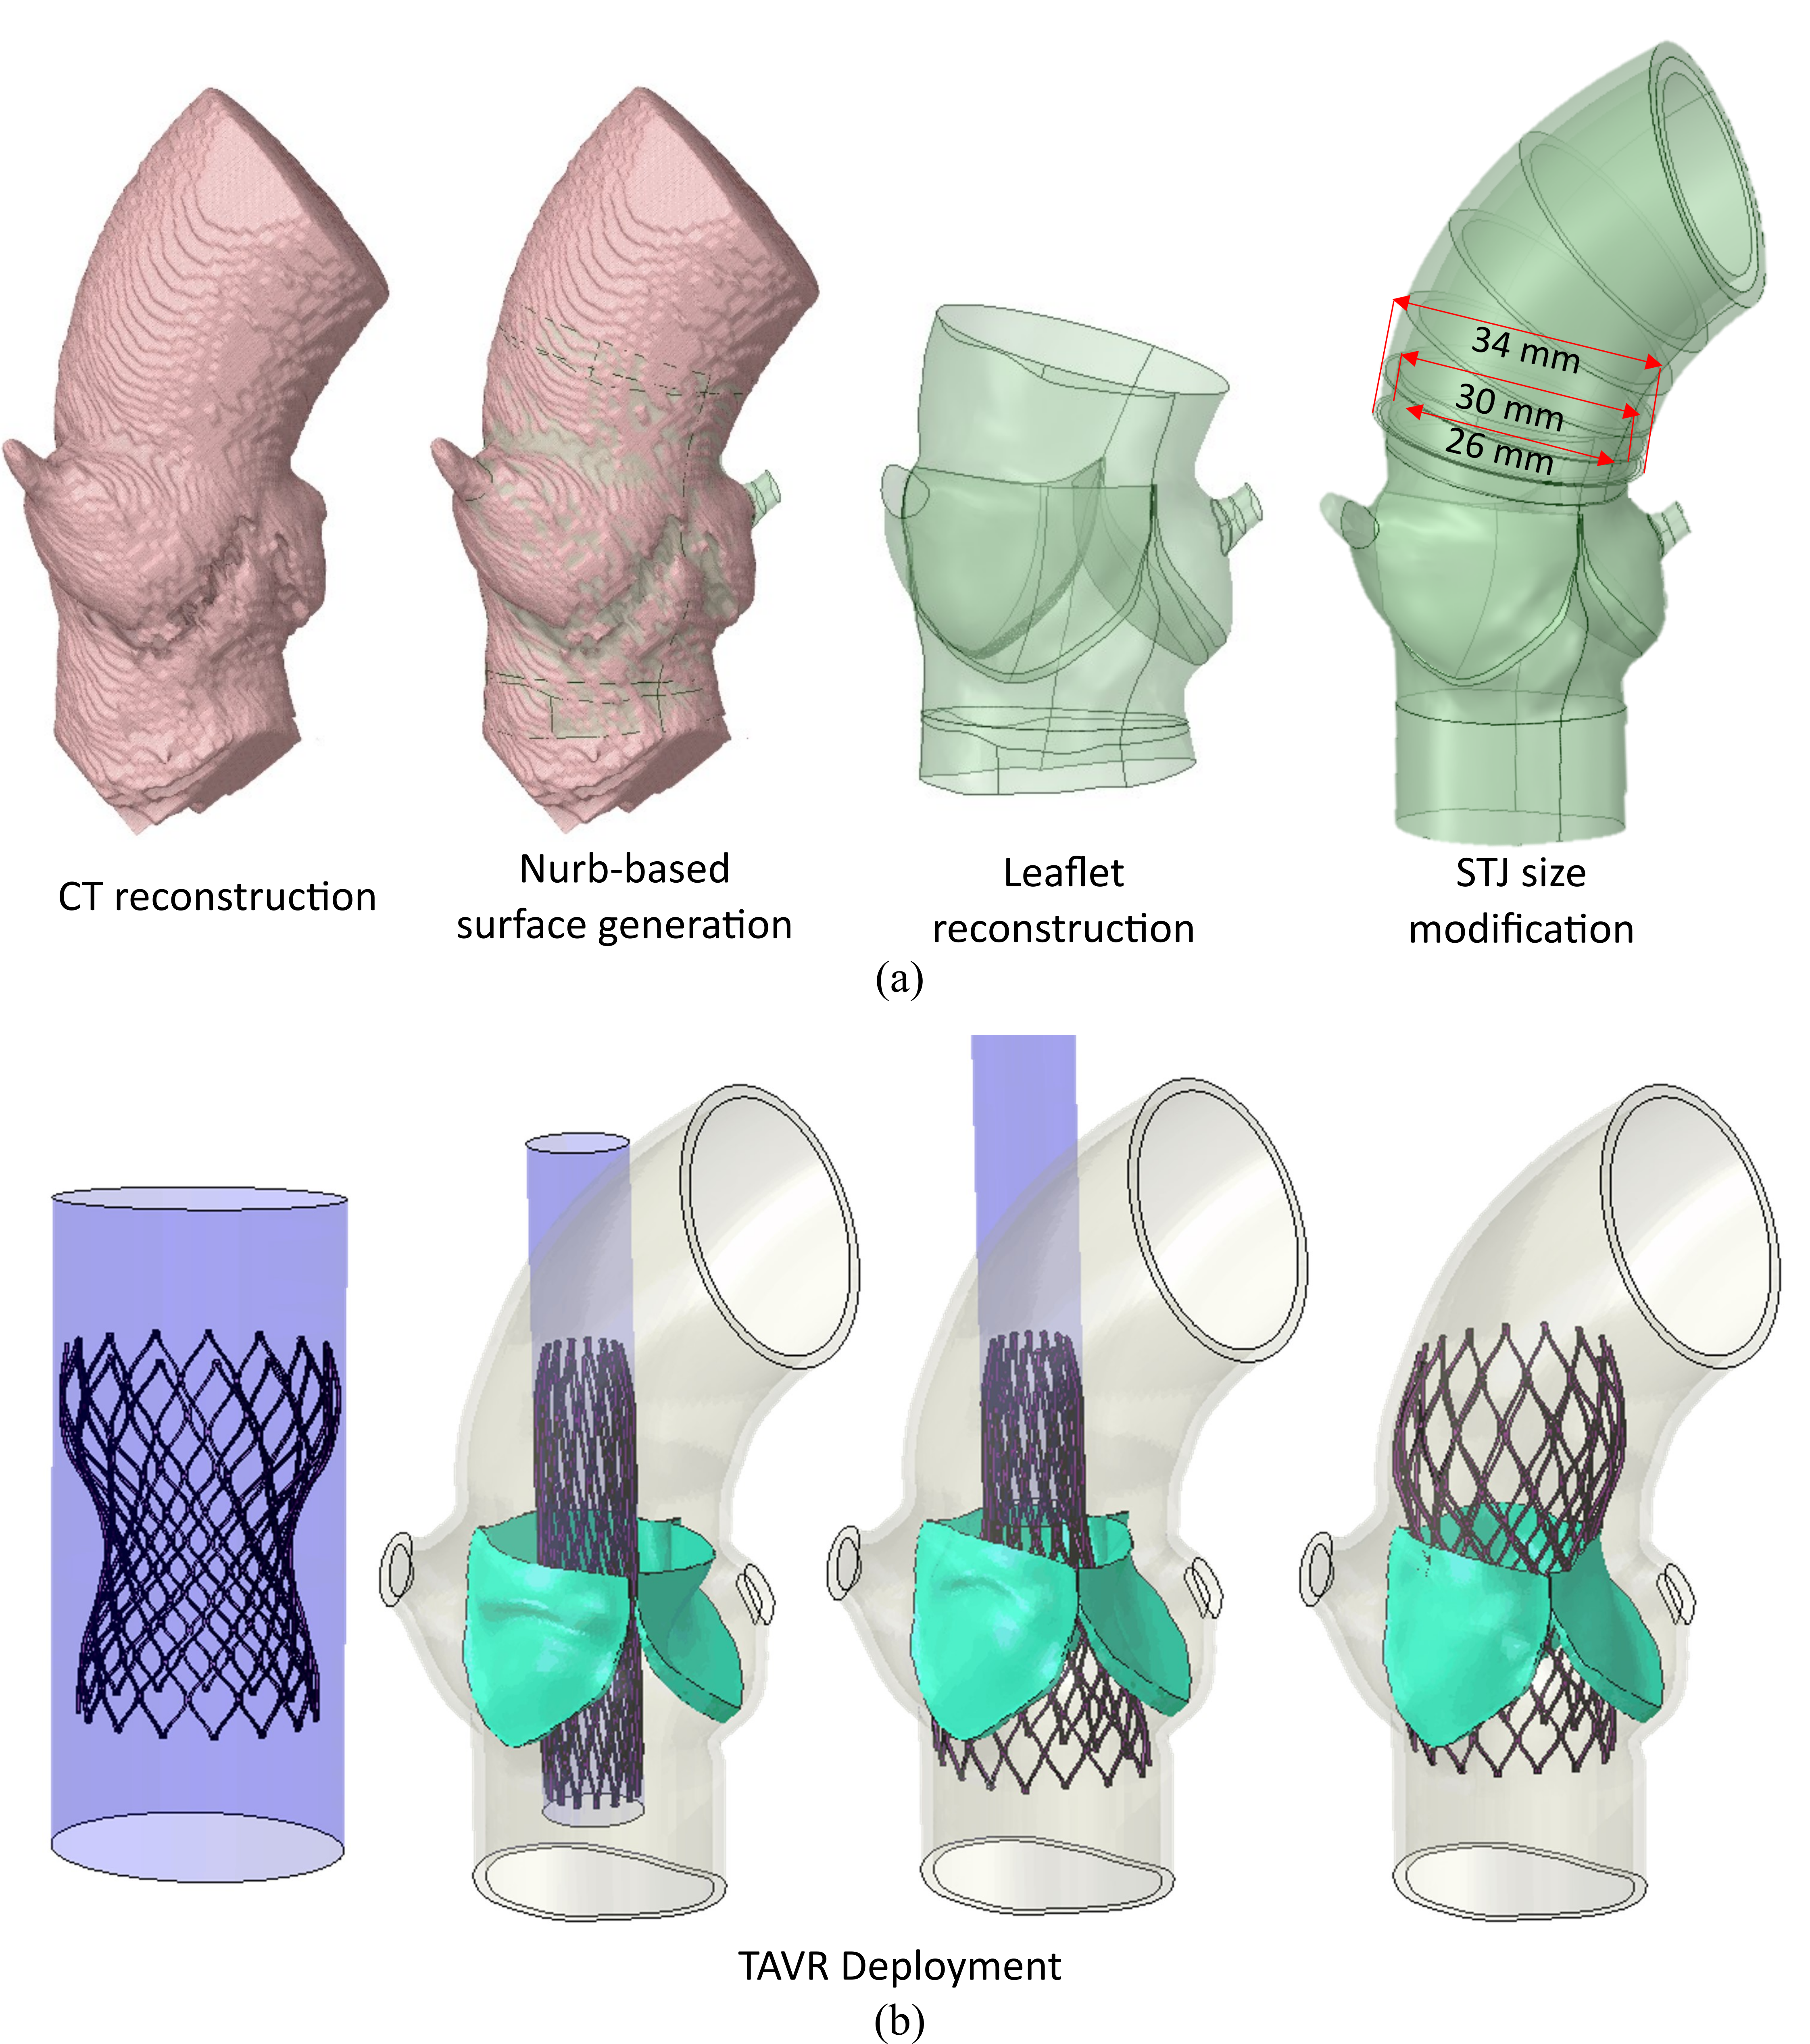 Patient model reconstruction and TAVR deployment